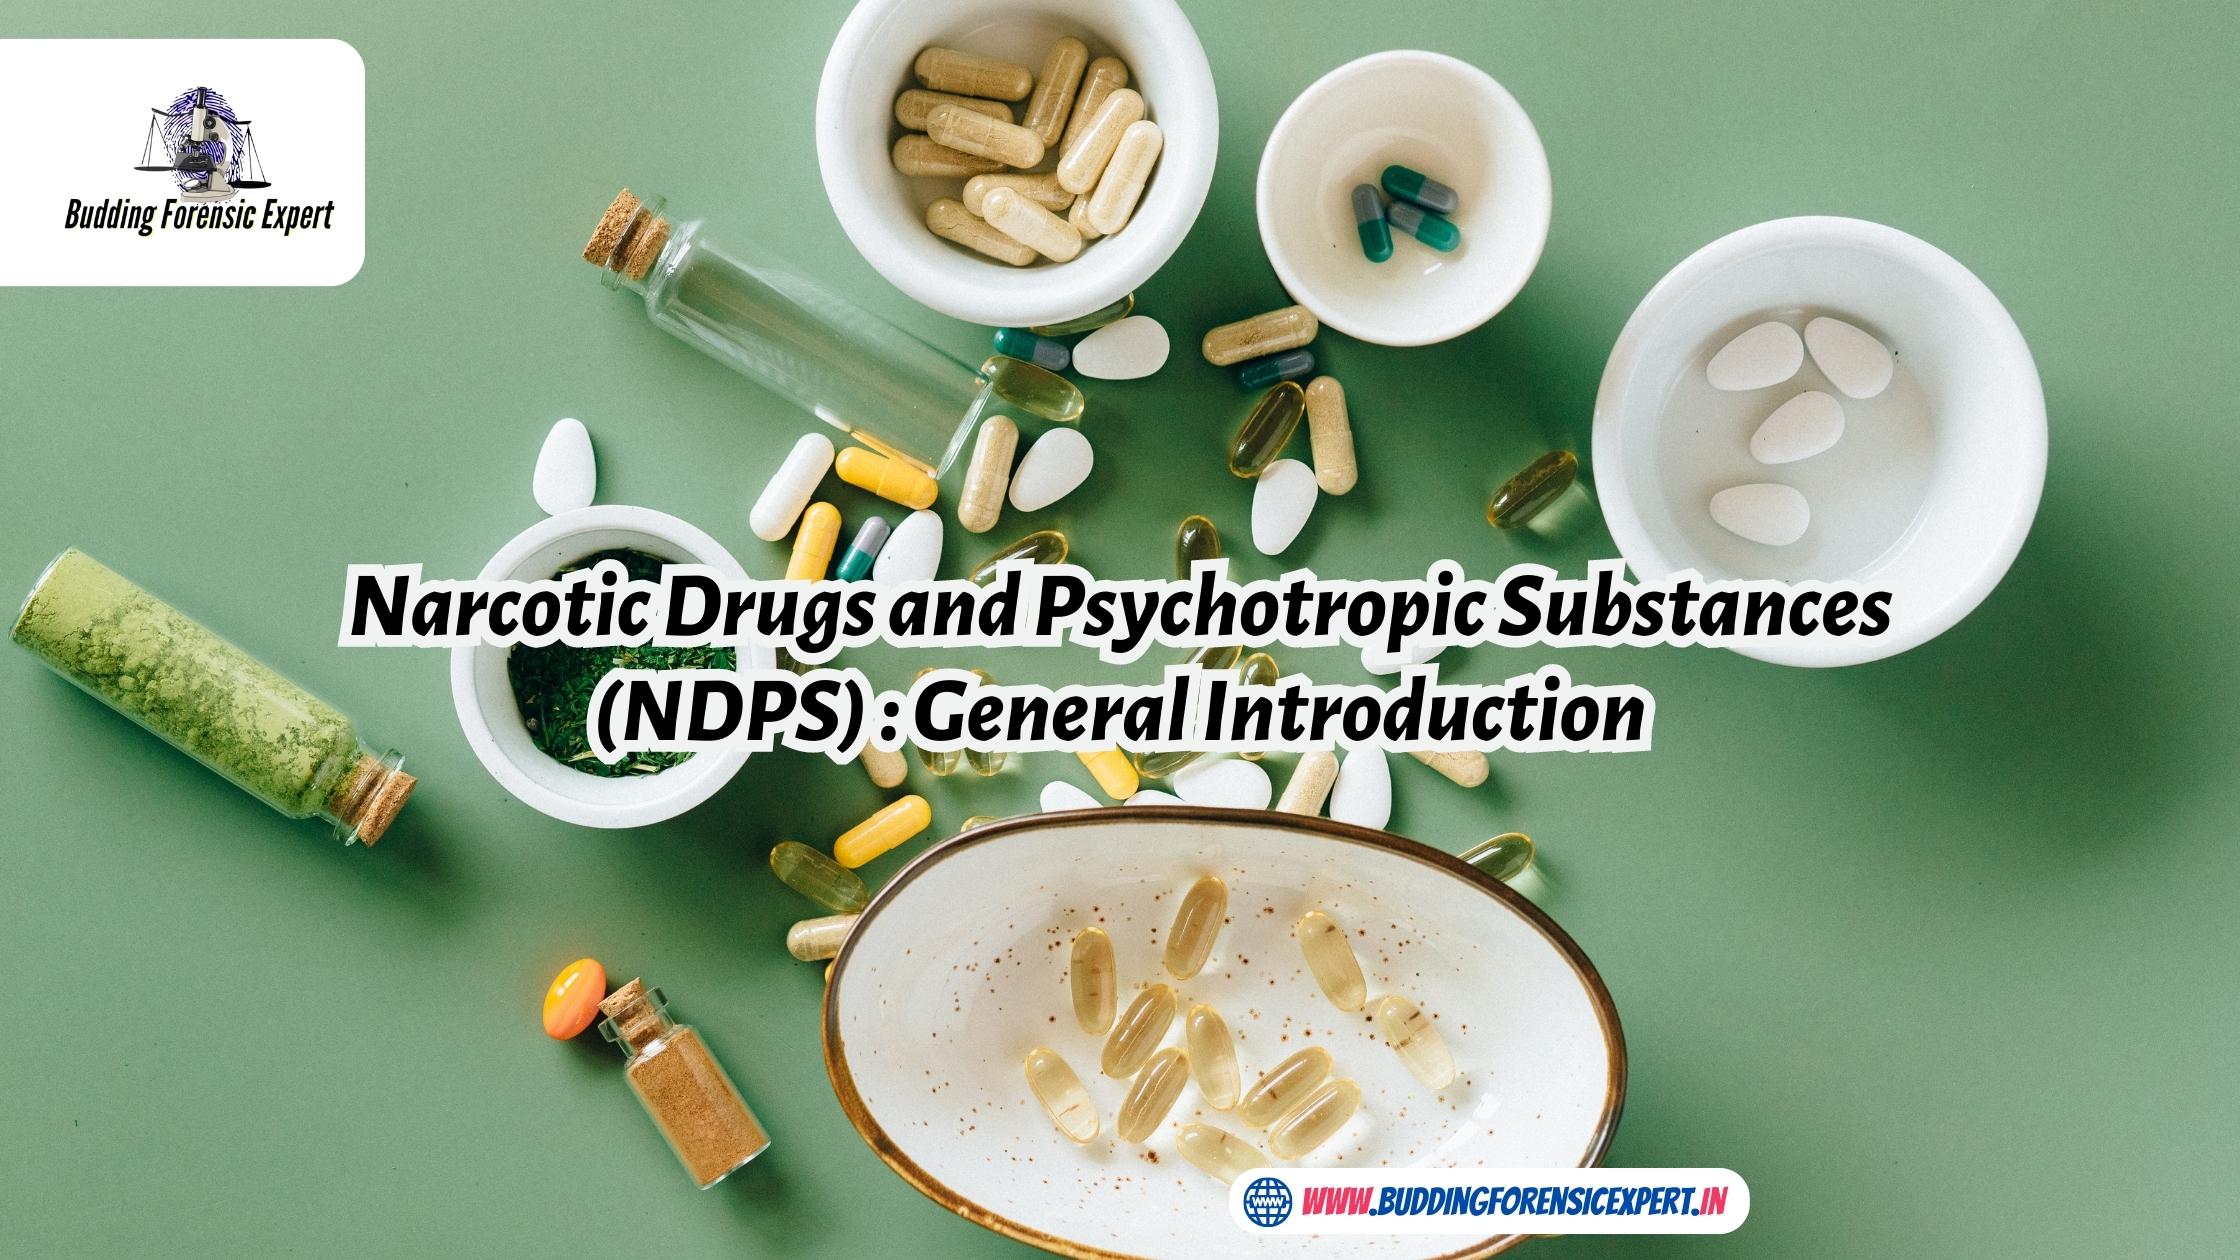 Narcotic Drugs and Psychotropic Substances (NDPS) : General Introduction